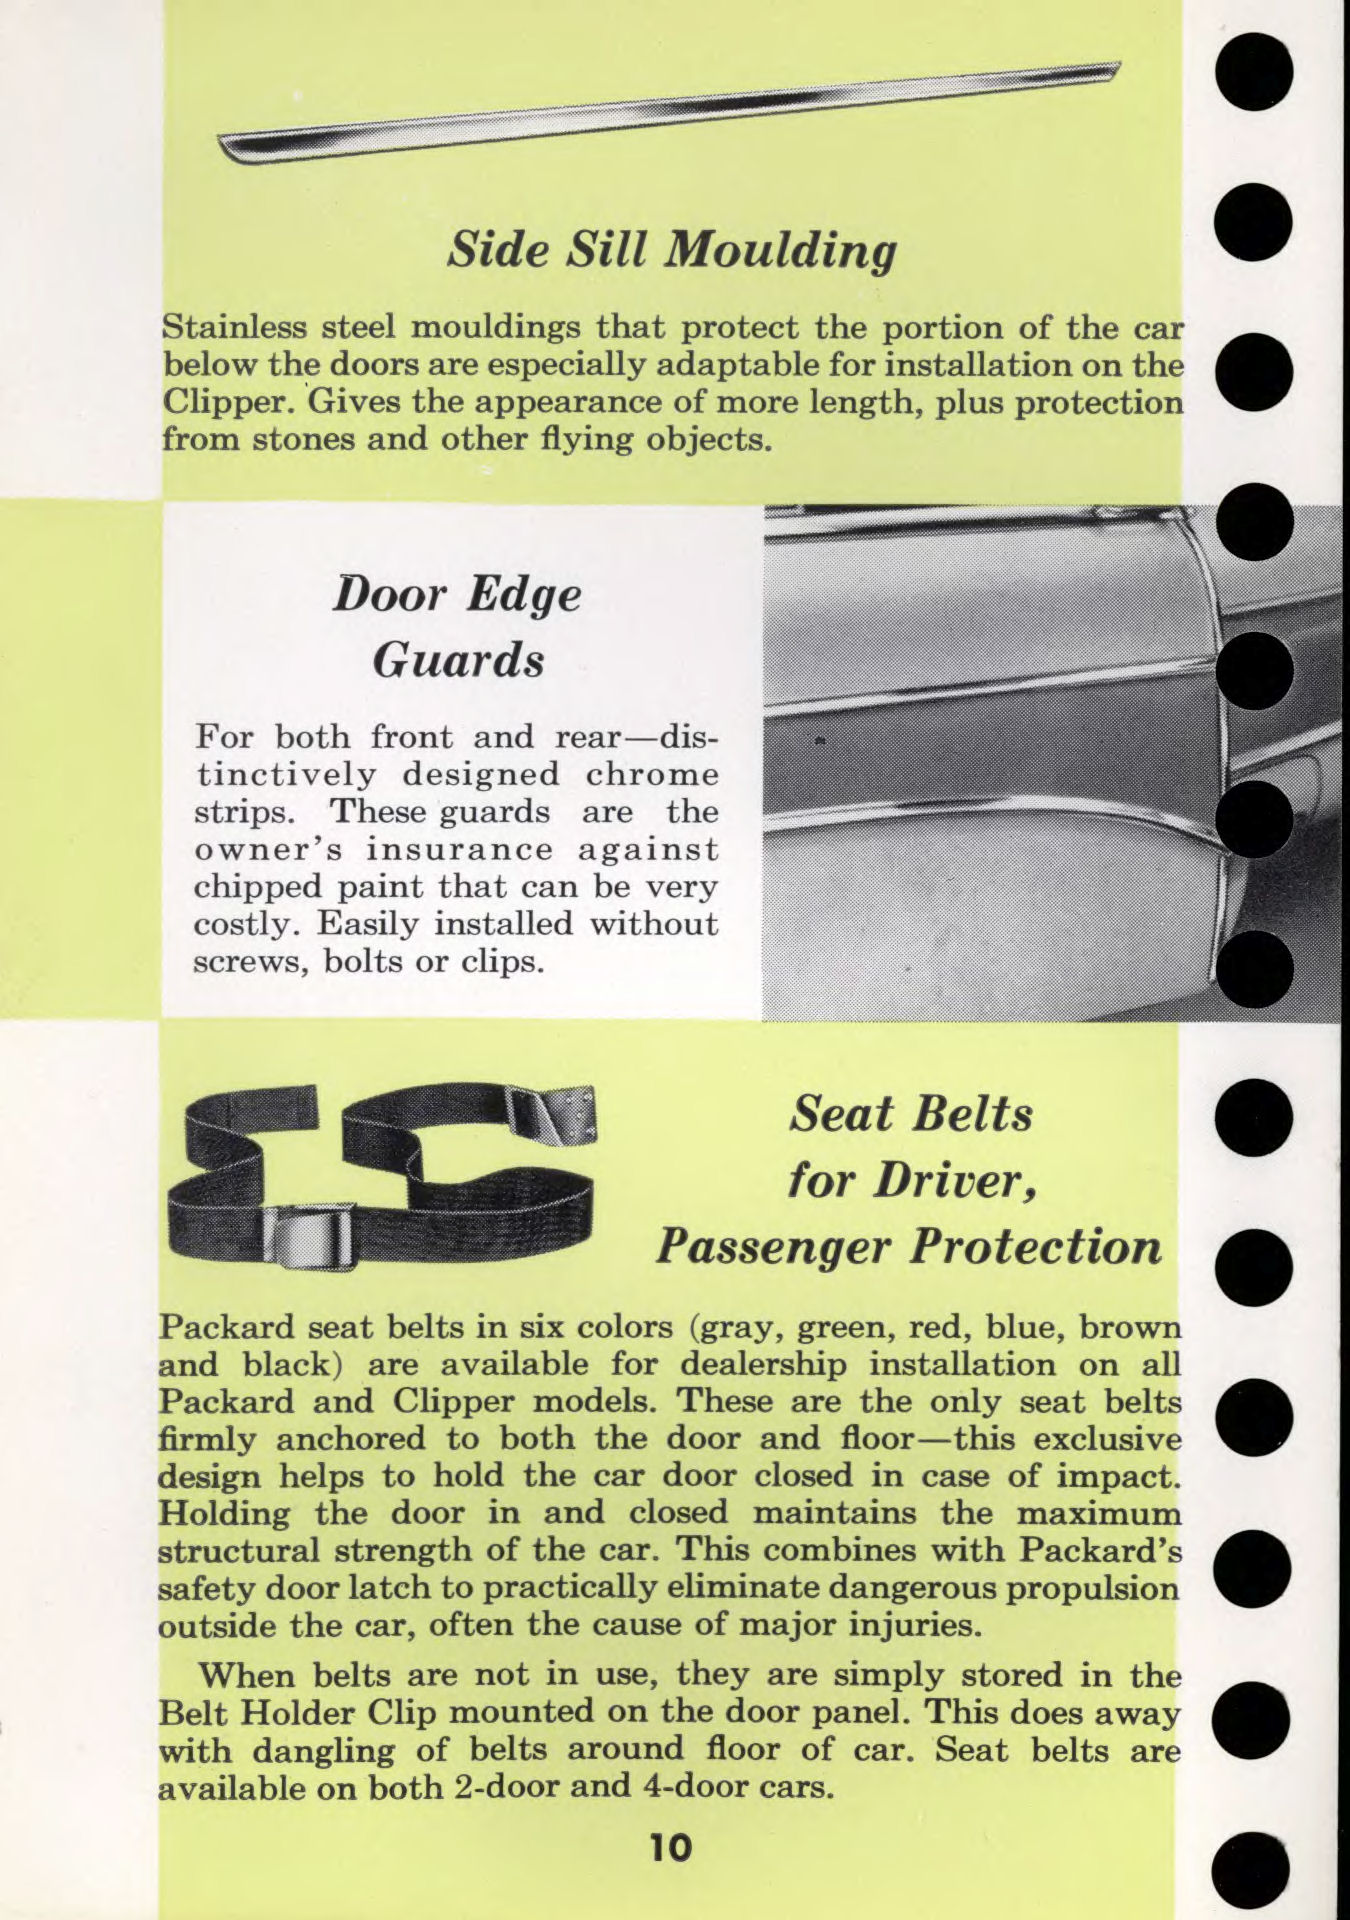 1956 Packard Data Book Page 102